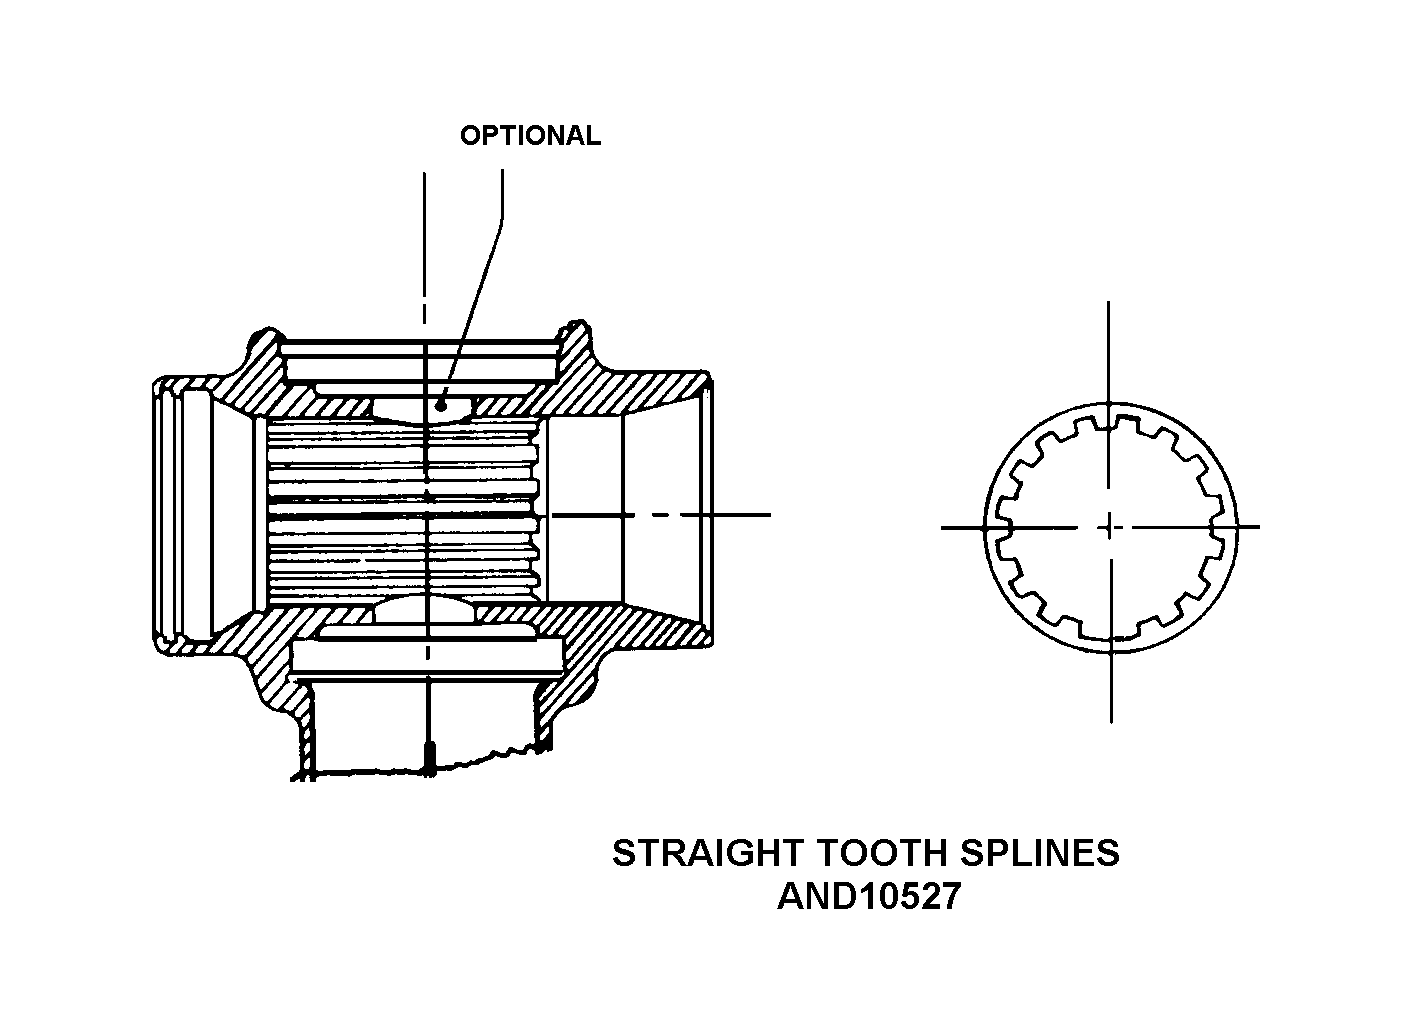 STRAIGHT TOOTH SPLINES AND10527 style nsn 1610-00-201-9809